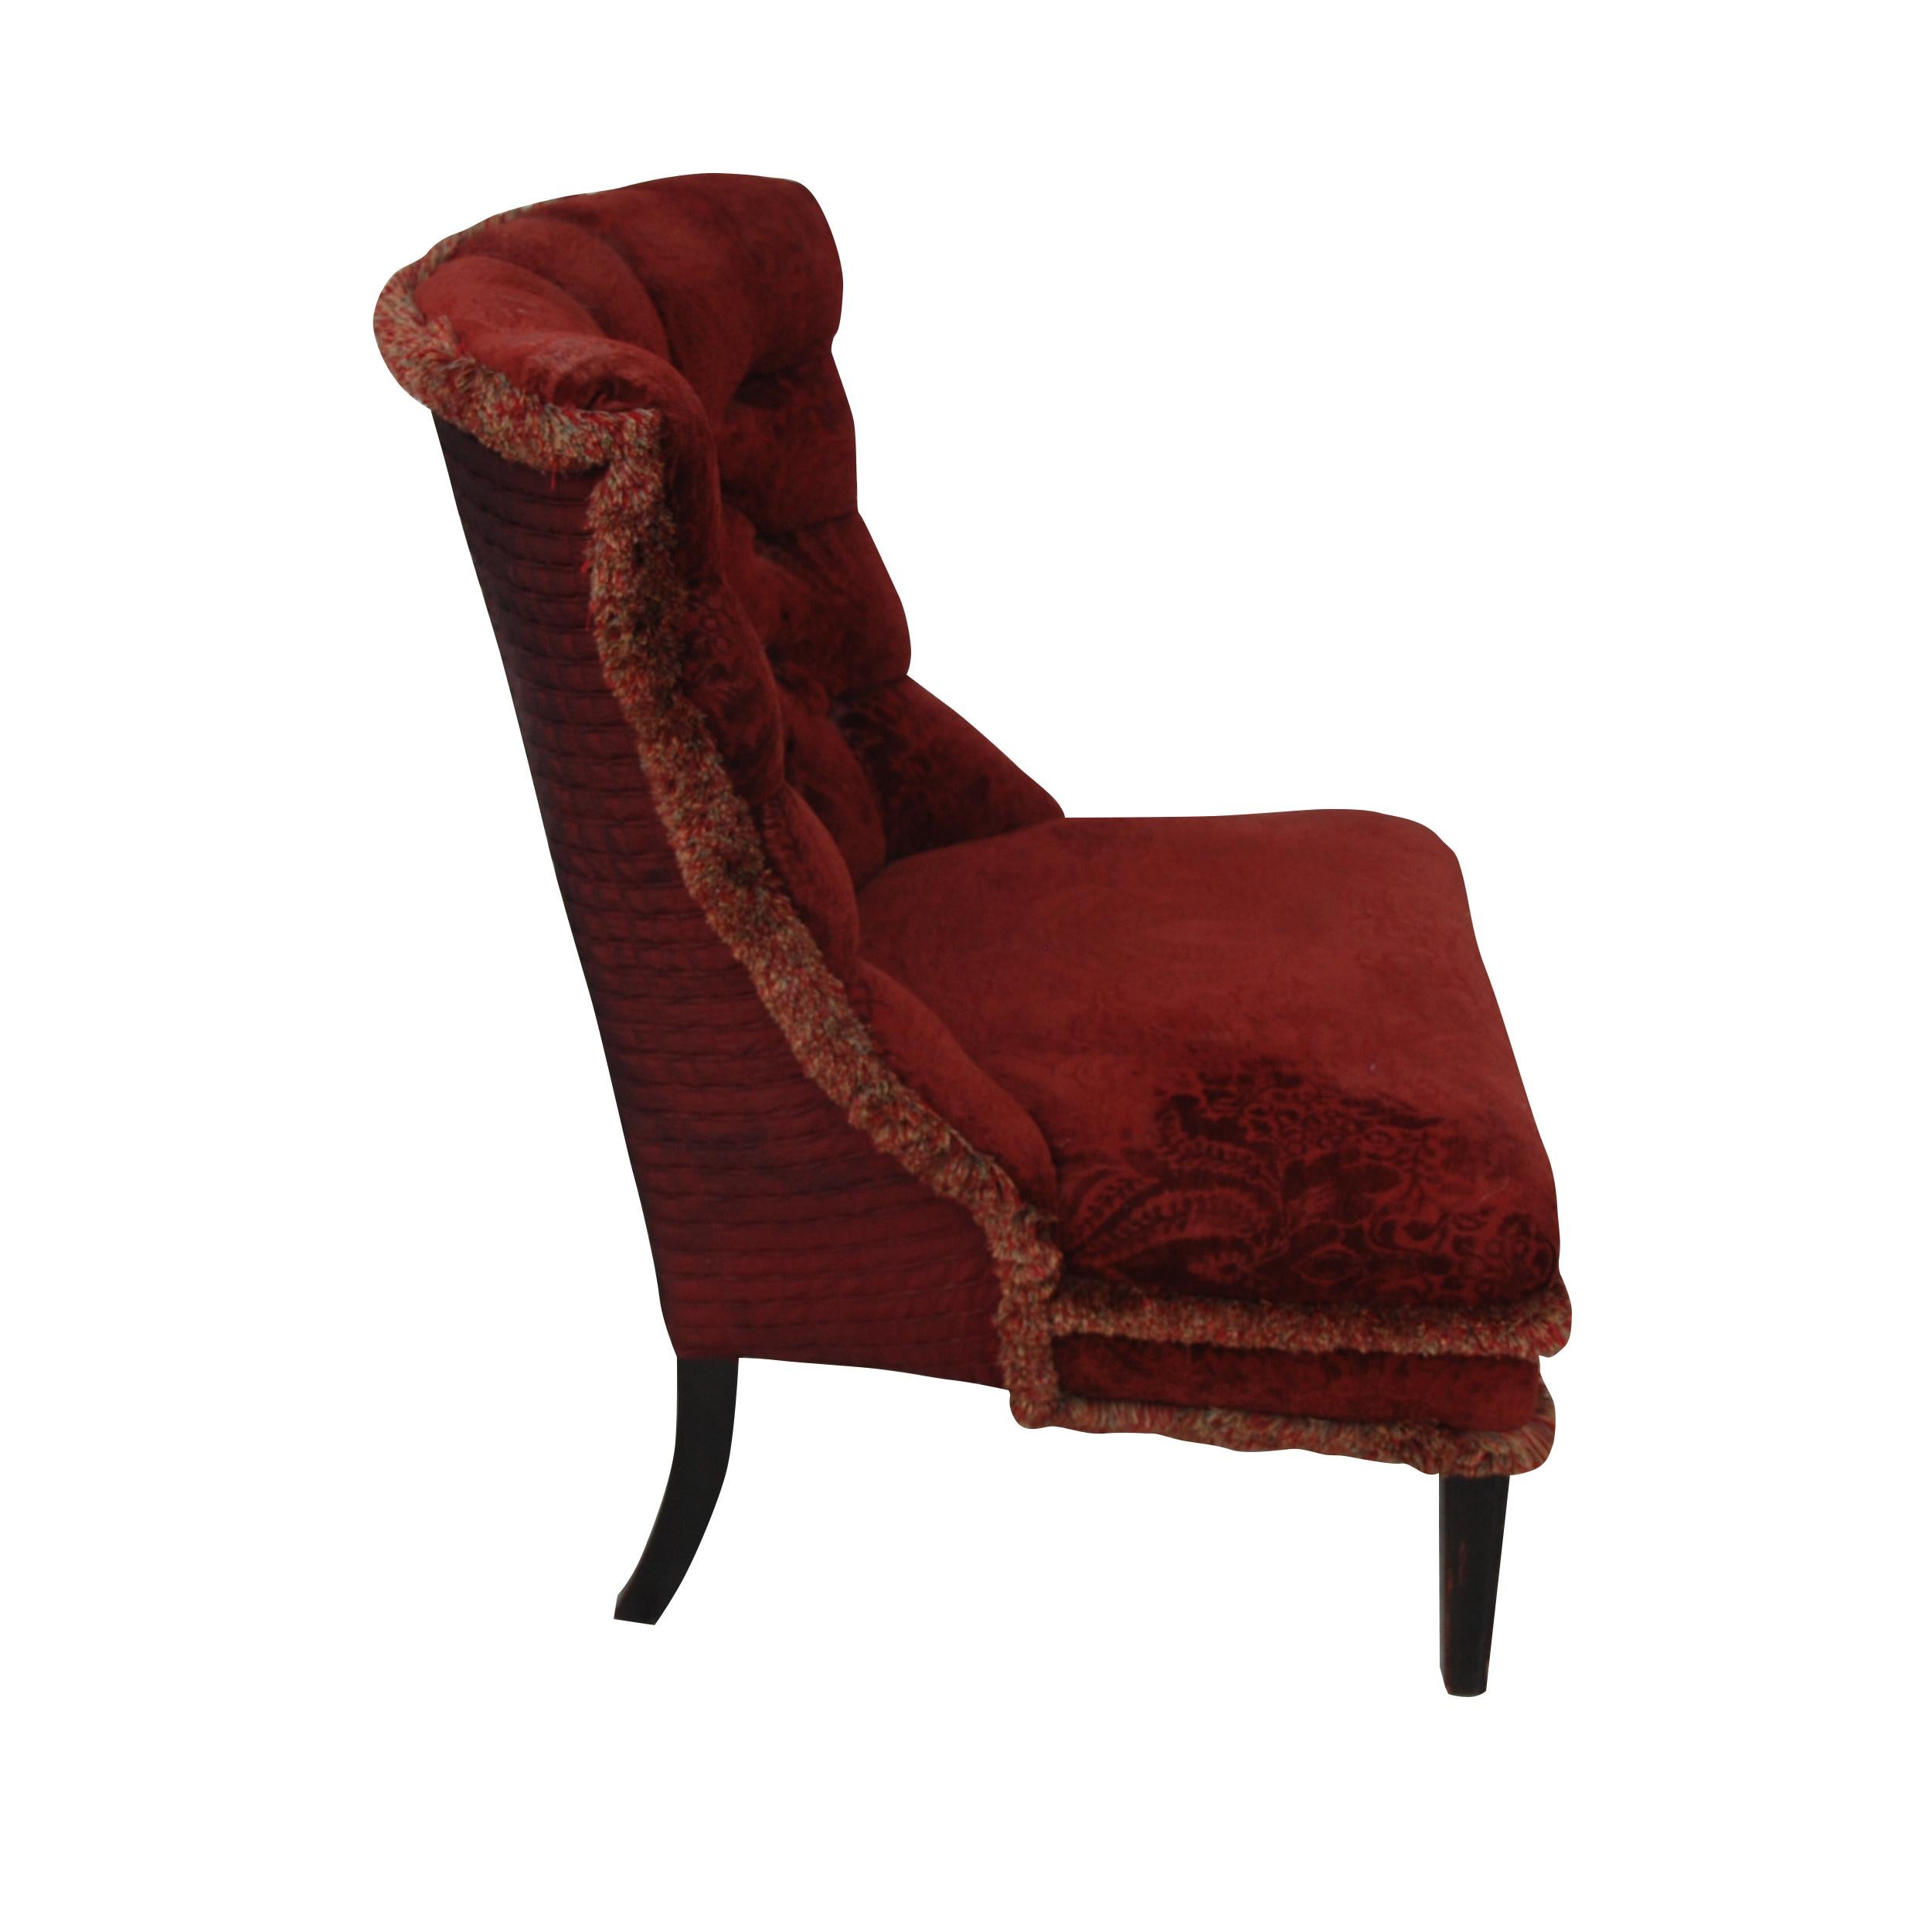 Vintage Victorian style slipper chair with tufting

English style slipper chair from the mid century features a tufted upholstered back with an upholstered seat. This fan back chair is perfect for welcoming the sitter comfortably. Upholstered in a